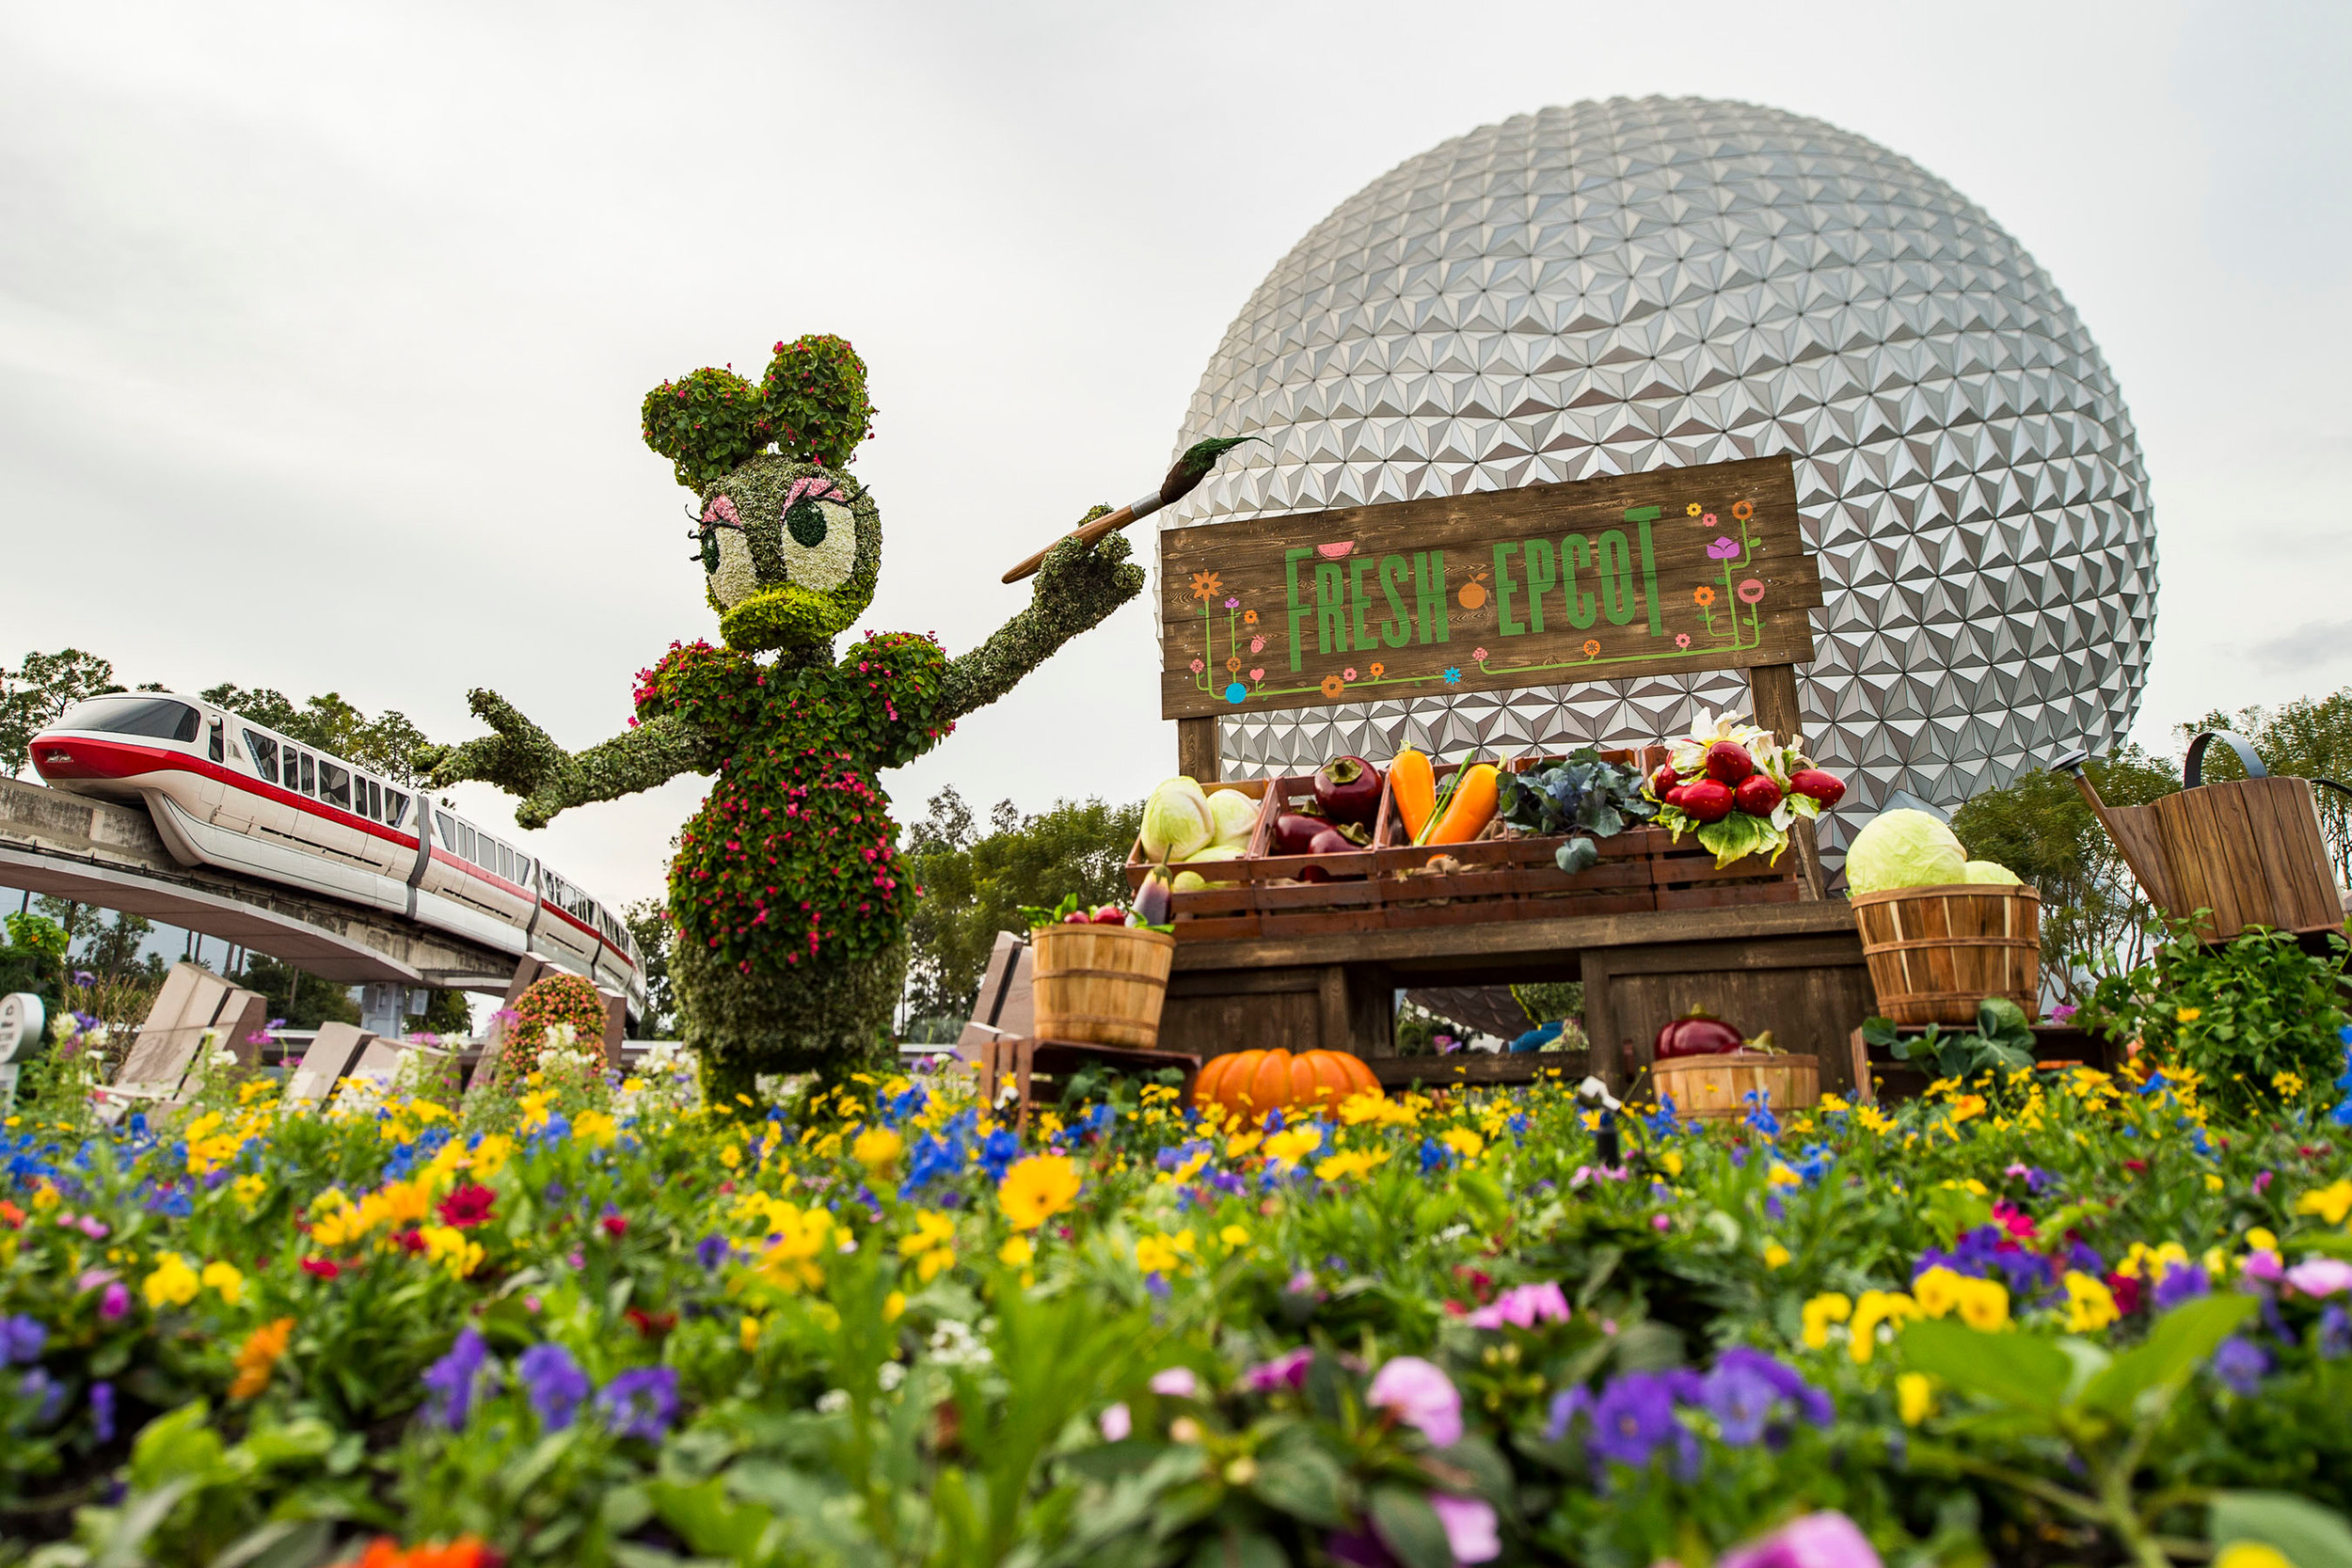 Daisy Duck in topiary form poses by a colorful garden at Epcot